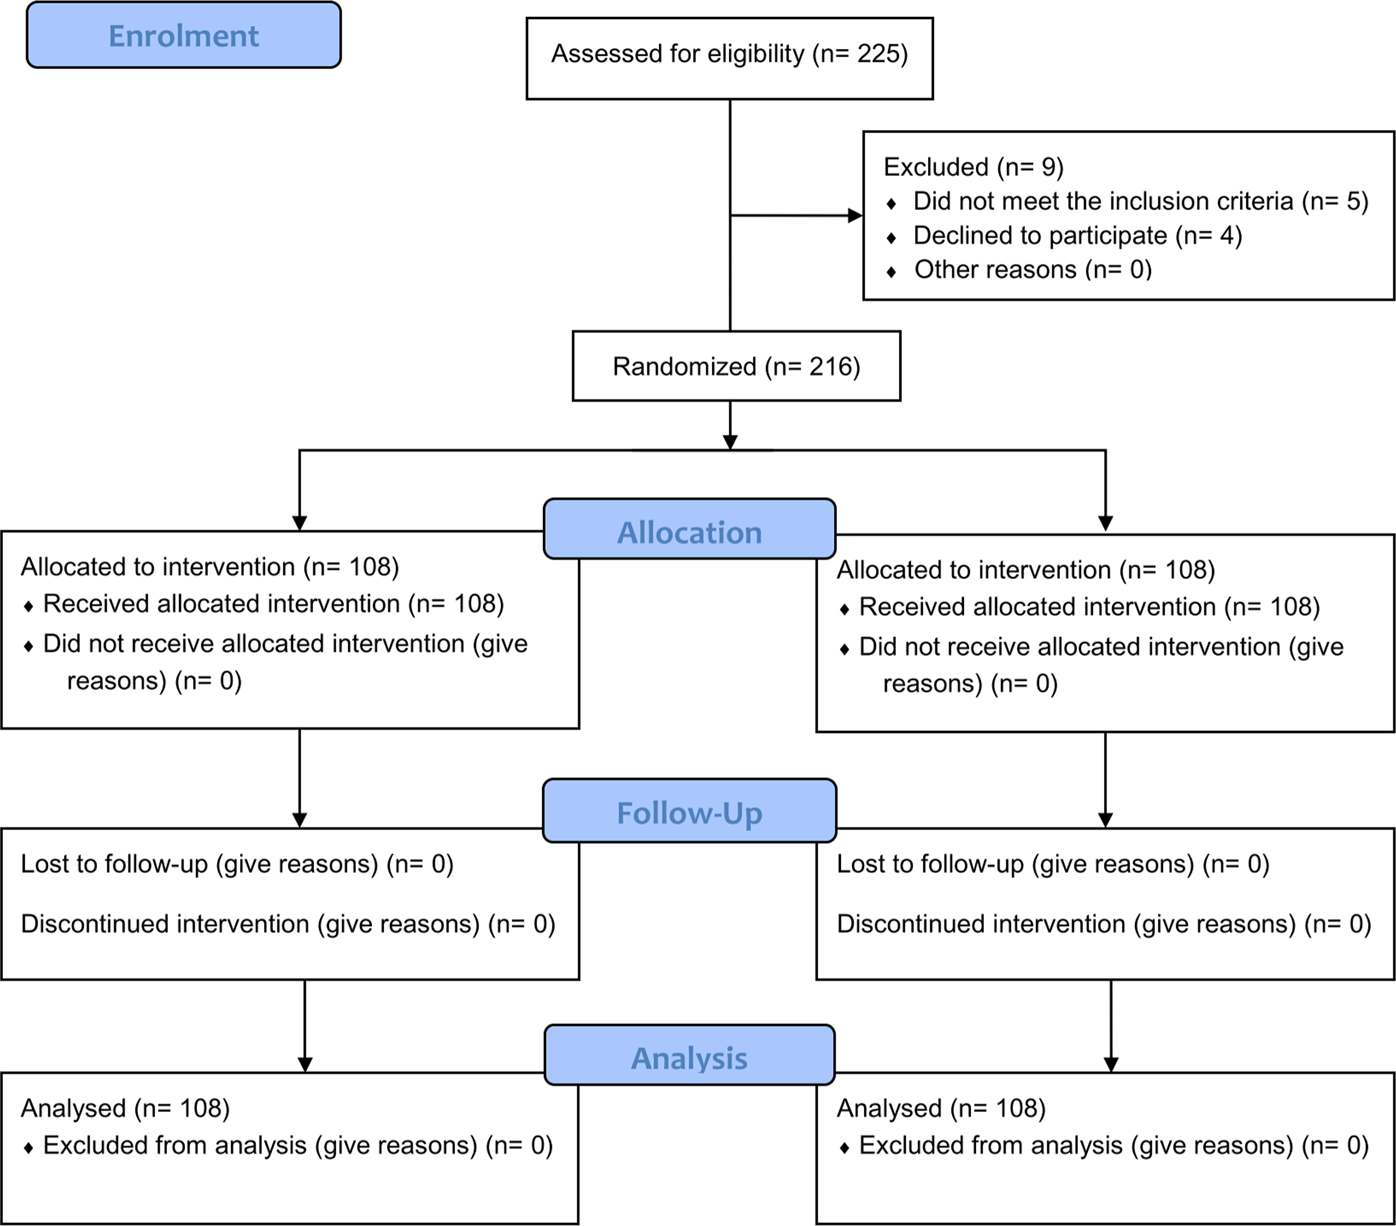 Perineal nerve block versus periprostatic block for patients undergoing  transperineal prostate biopsy (APROPOS): a prospective, multicentre,  randomised controlled study - eClinicalMedicine